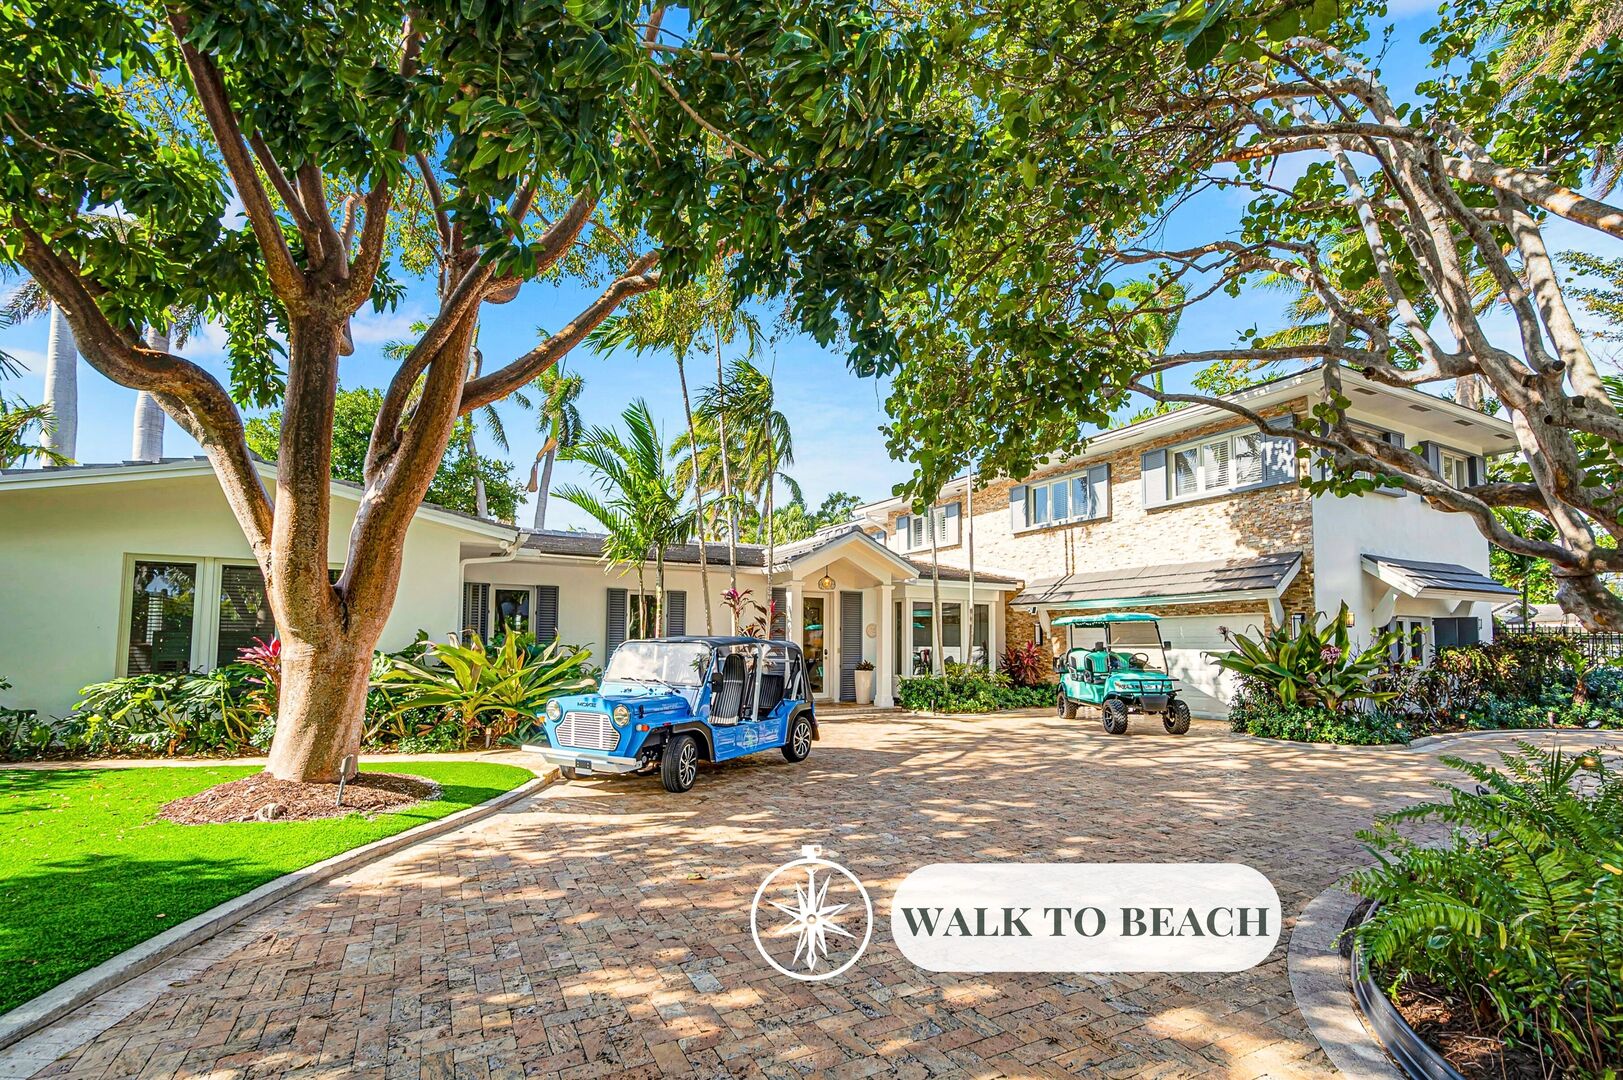 This Spanish Revival ample residence is located in the private  Harbor Beach neighborhood.